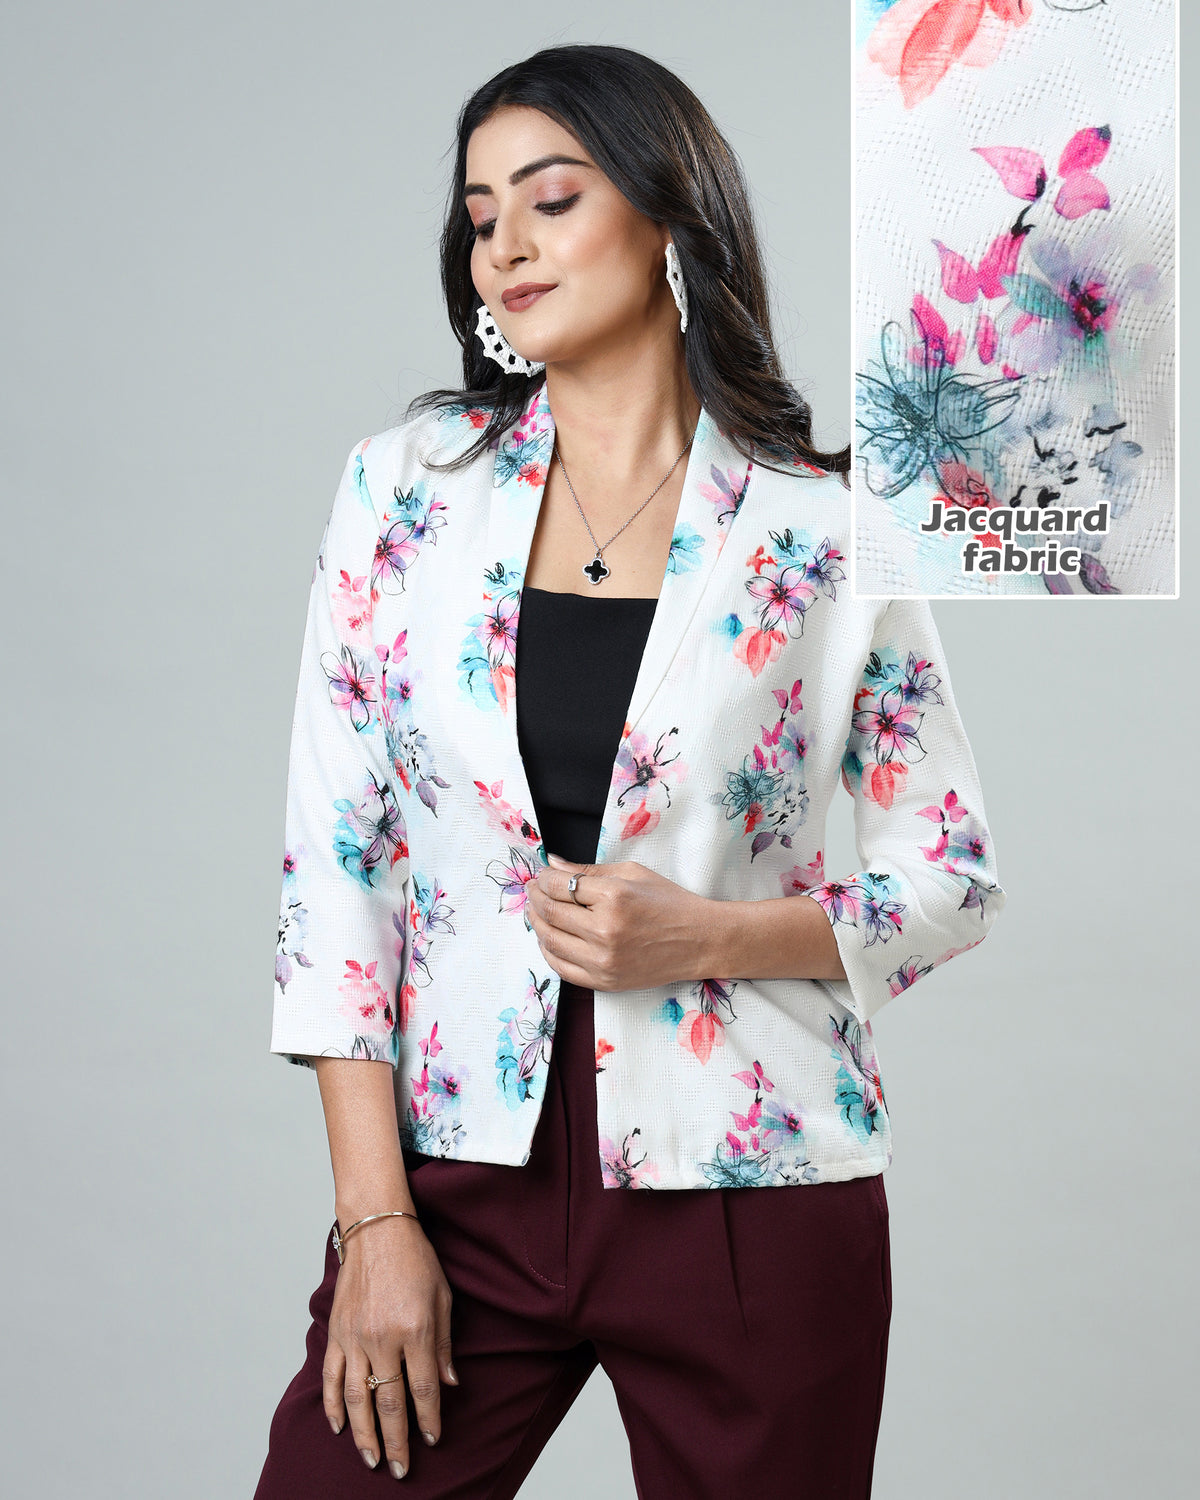 Our Bestselling Classic Floral Women's Jacket